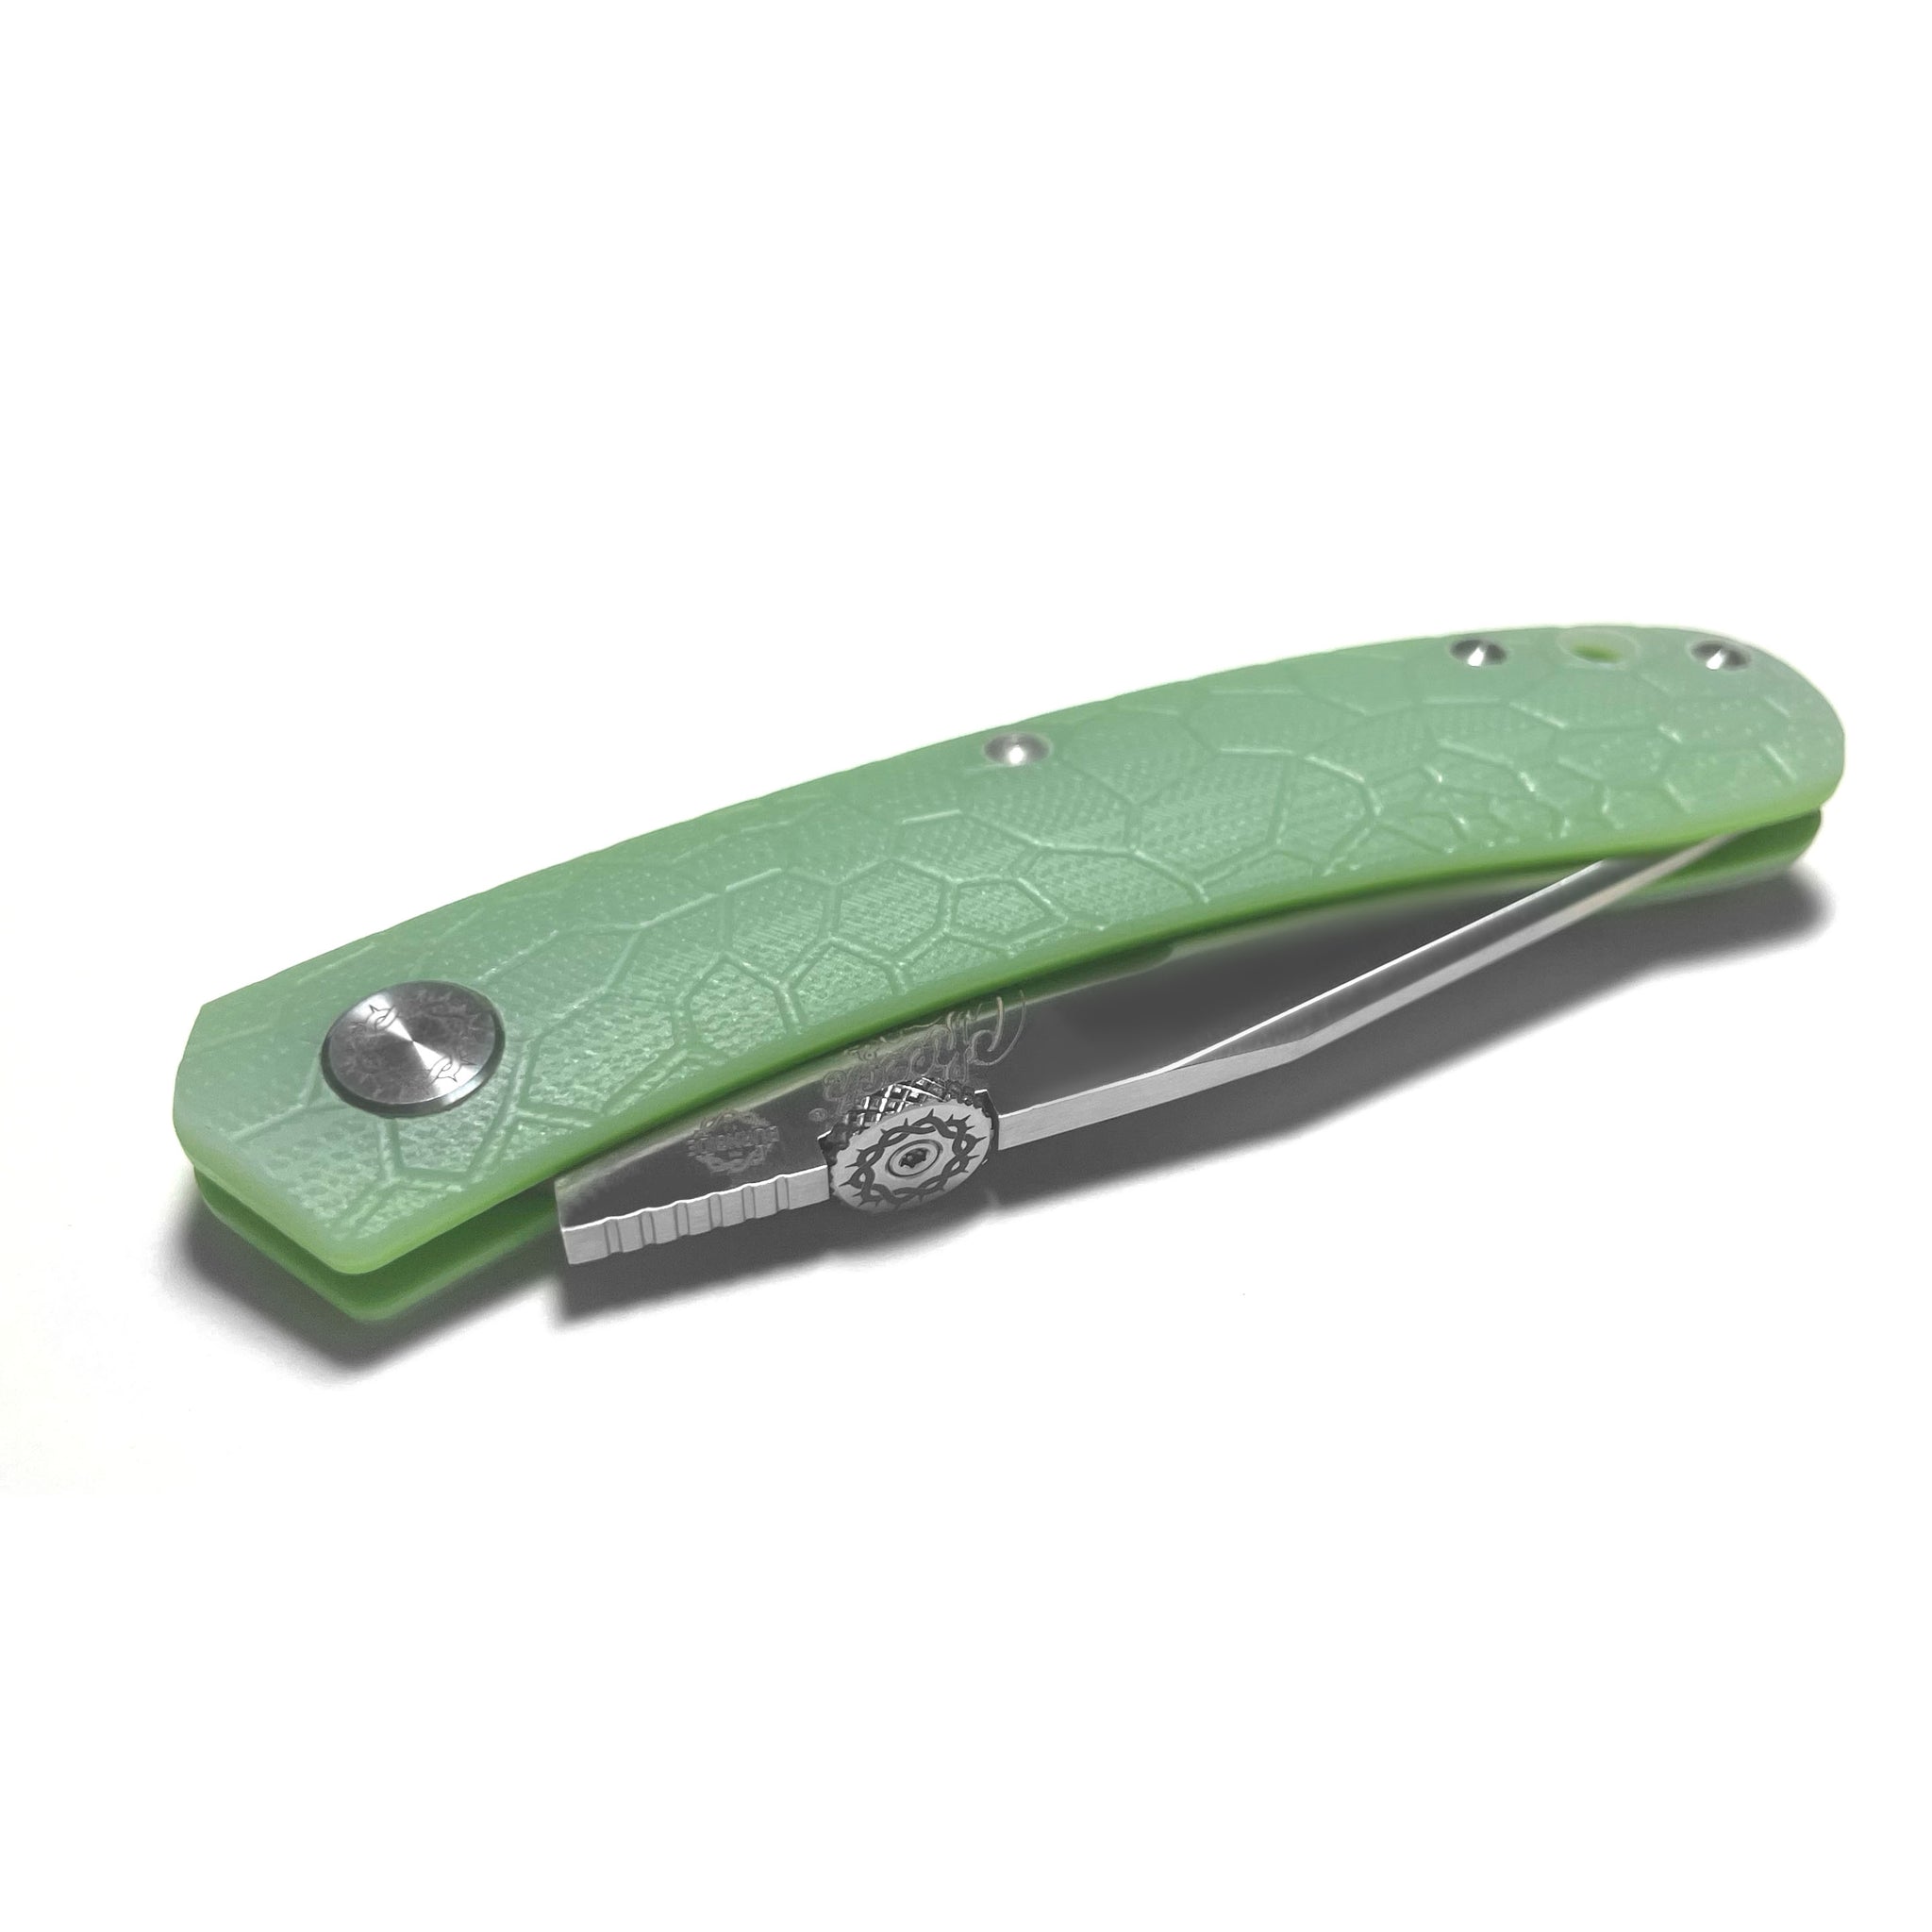 CHEECH & CHONG AMIGO SLIPJOINT POCKET KNIFE. LIMITED EDITION BY BURNSIDE KNIVES